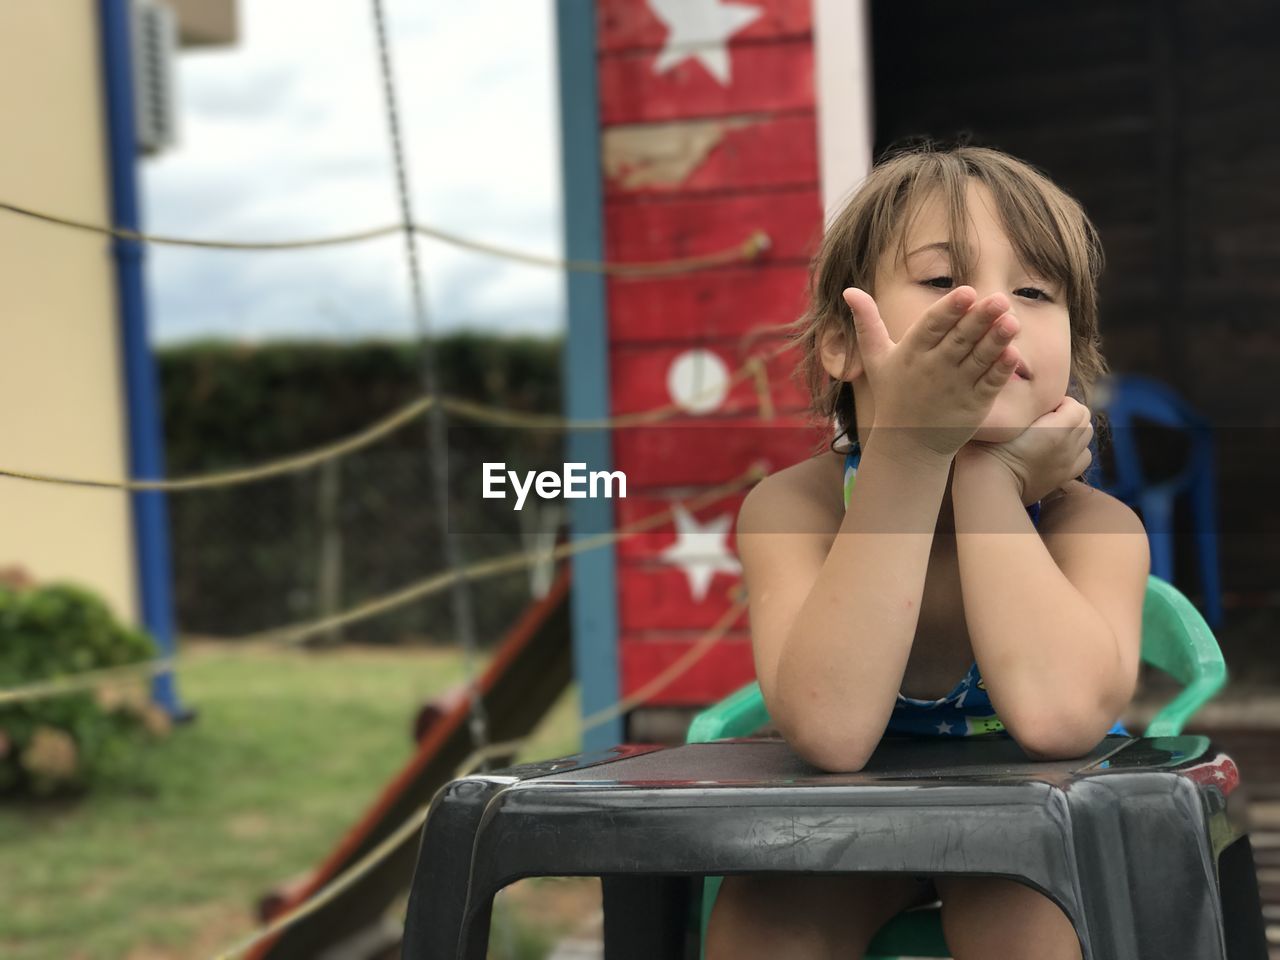 Girl looking away while sitting on chair at backyard